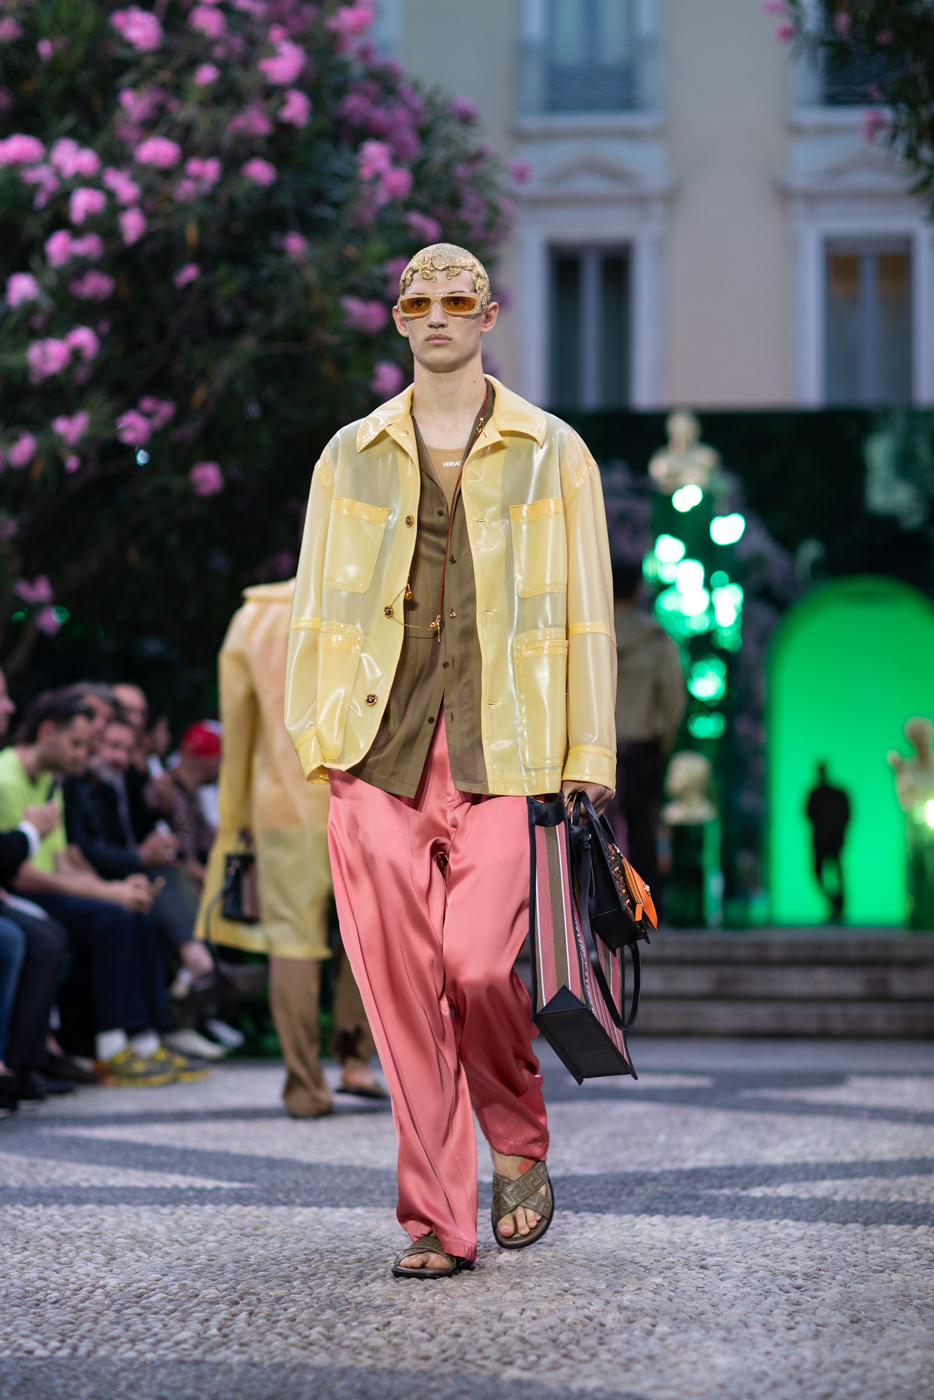 Stunning Versace unisex bag from the fashion show 2020 : r/Versace